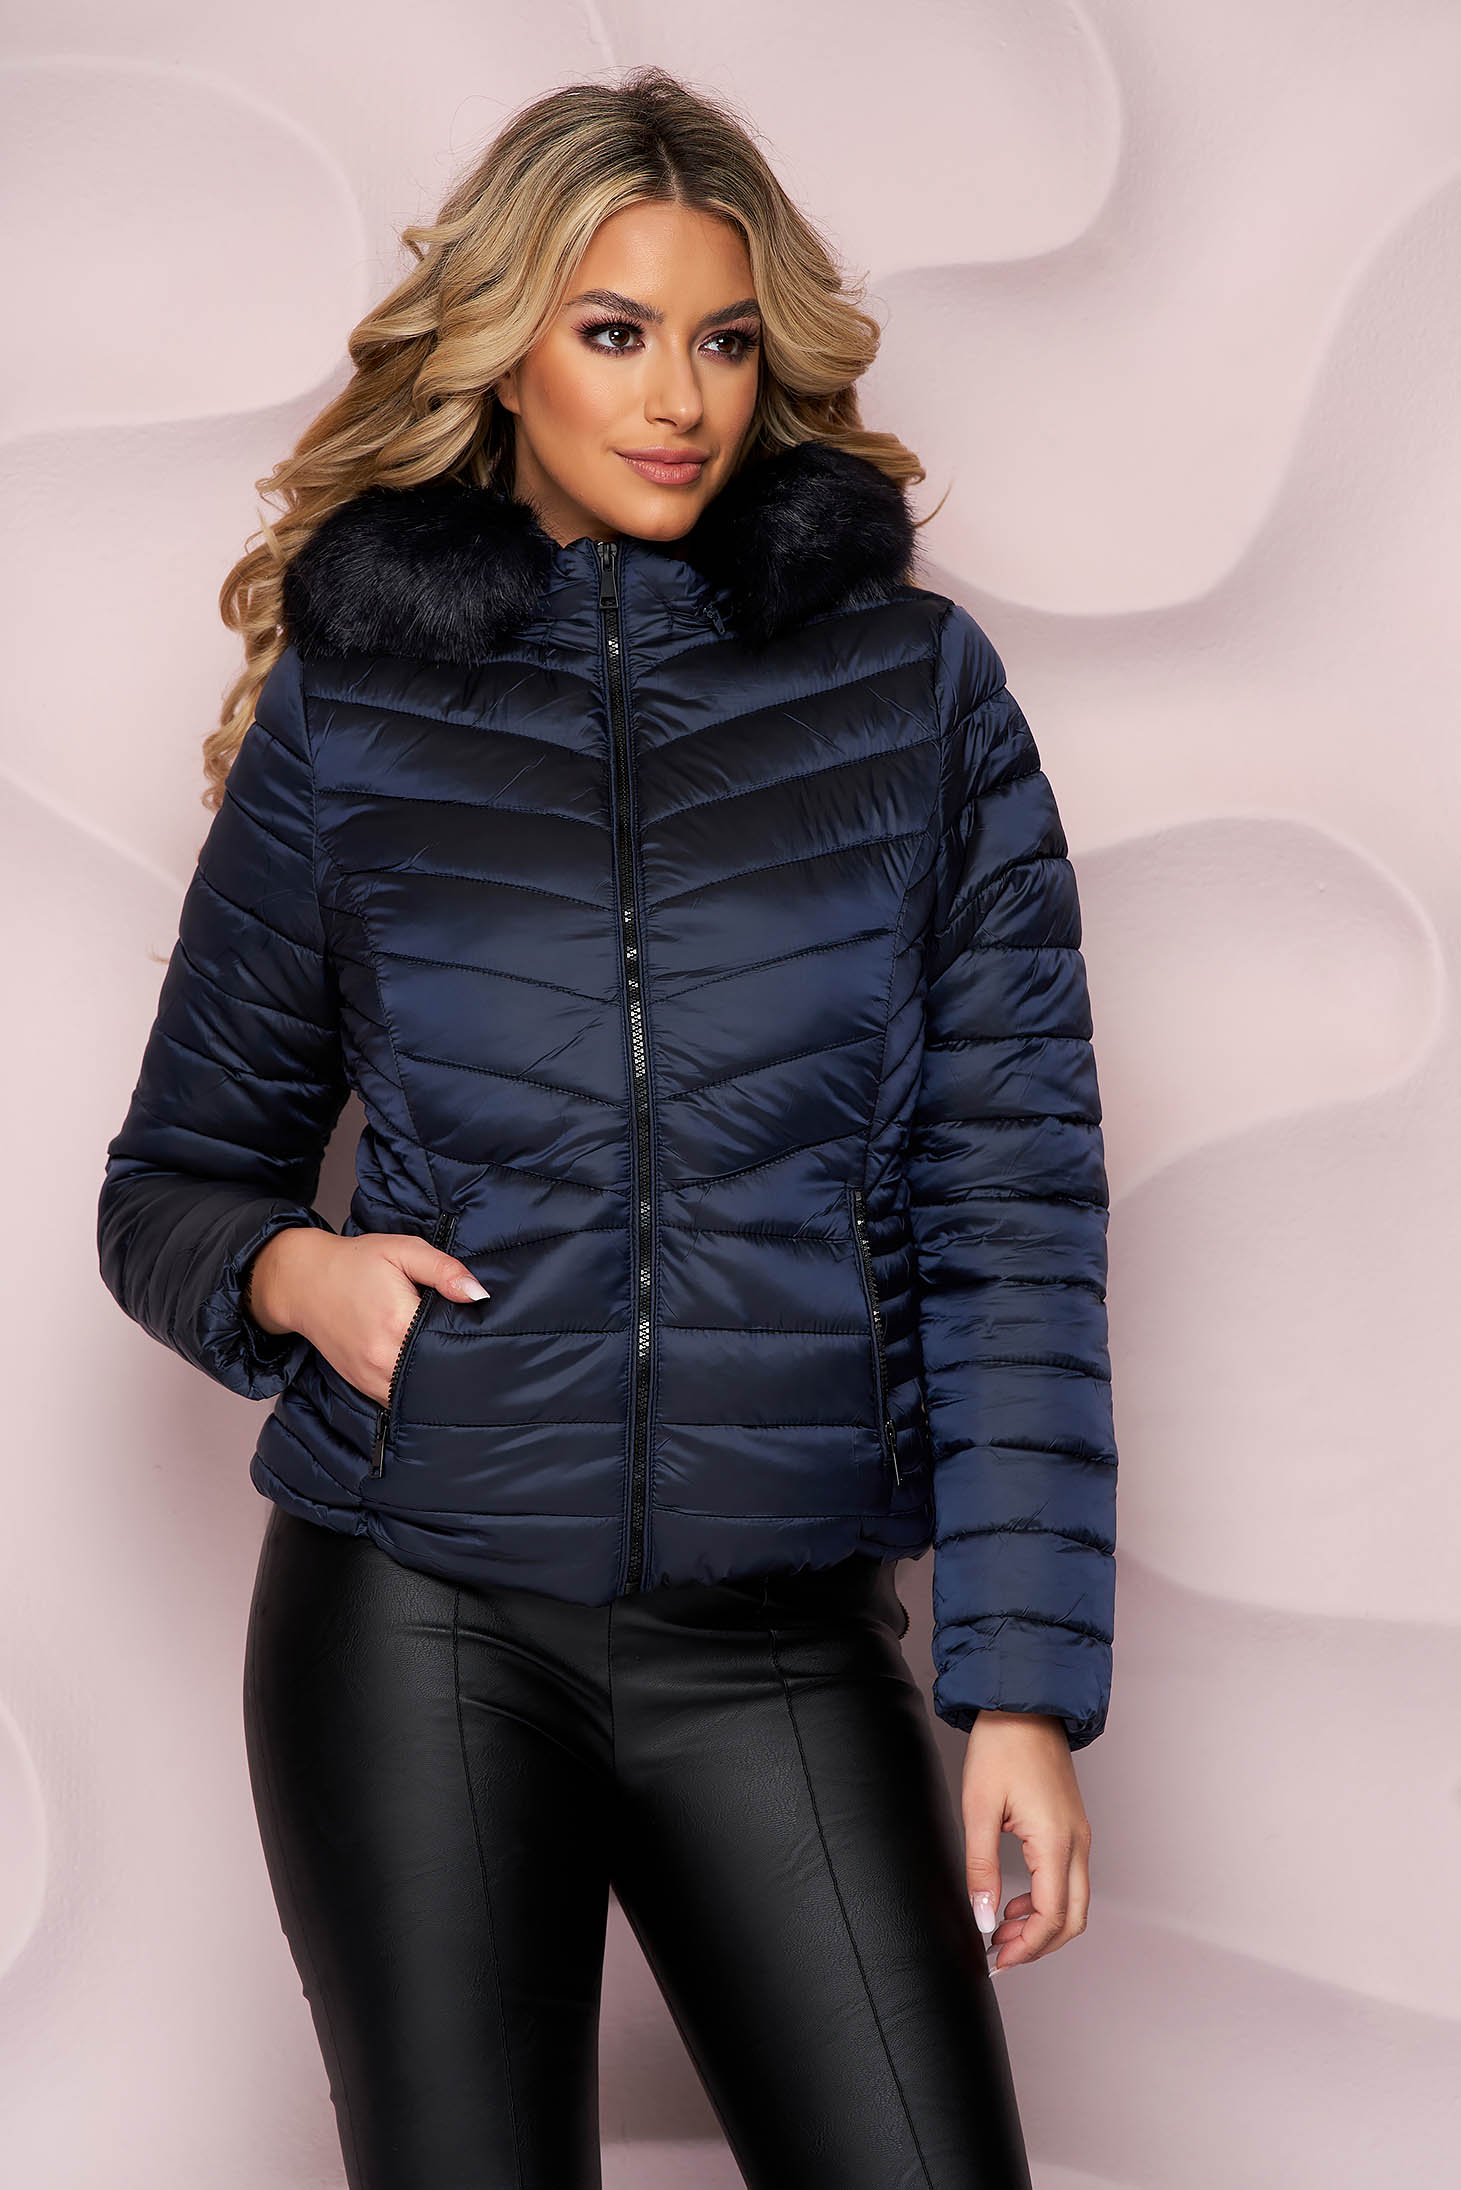 Darkblue jacket tented from slicker with furry hood